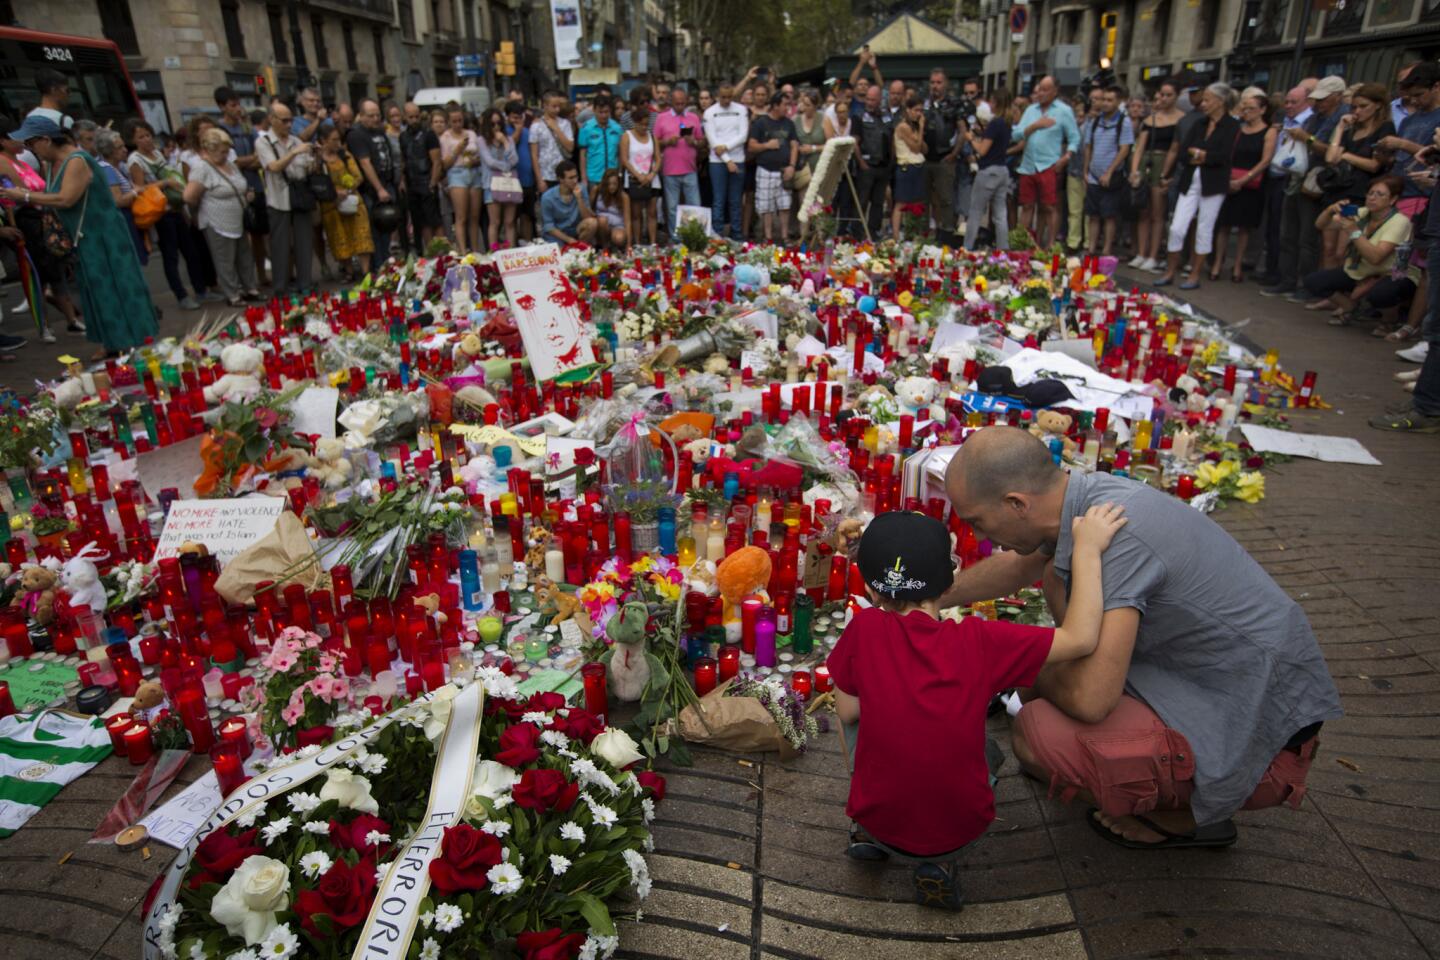 A man with his son light candles at a memorial to victims of a terror attack on Barcelona's Las Ramblas promenade in Barcelona, Spain on Aug. 19, 2017.